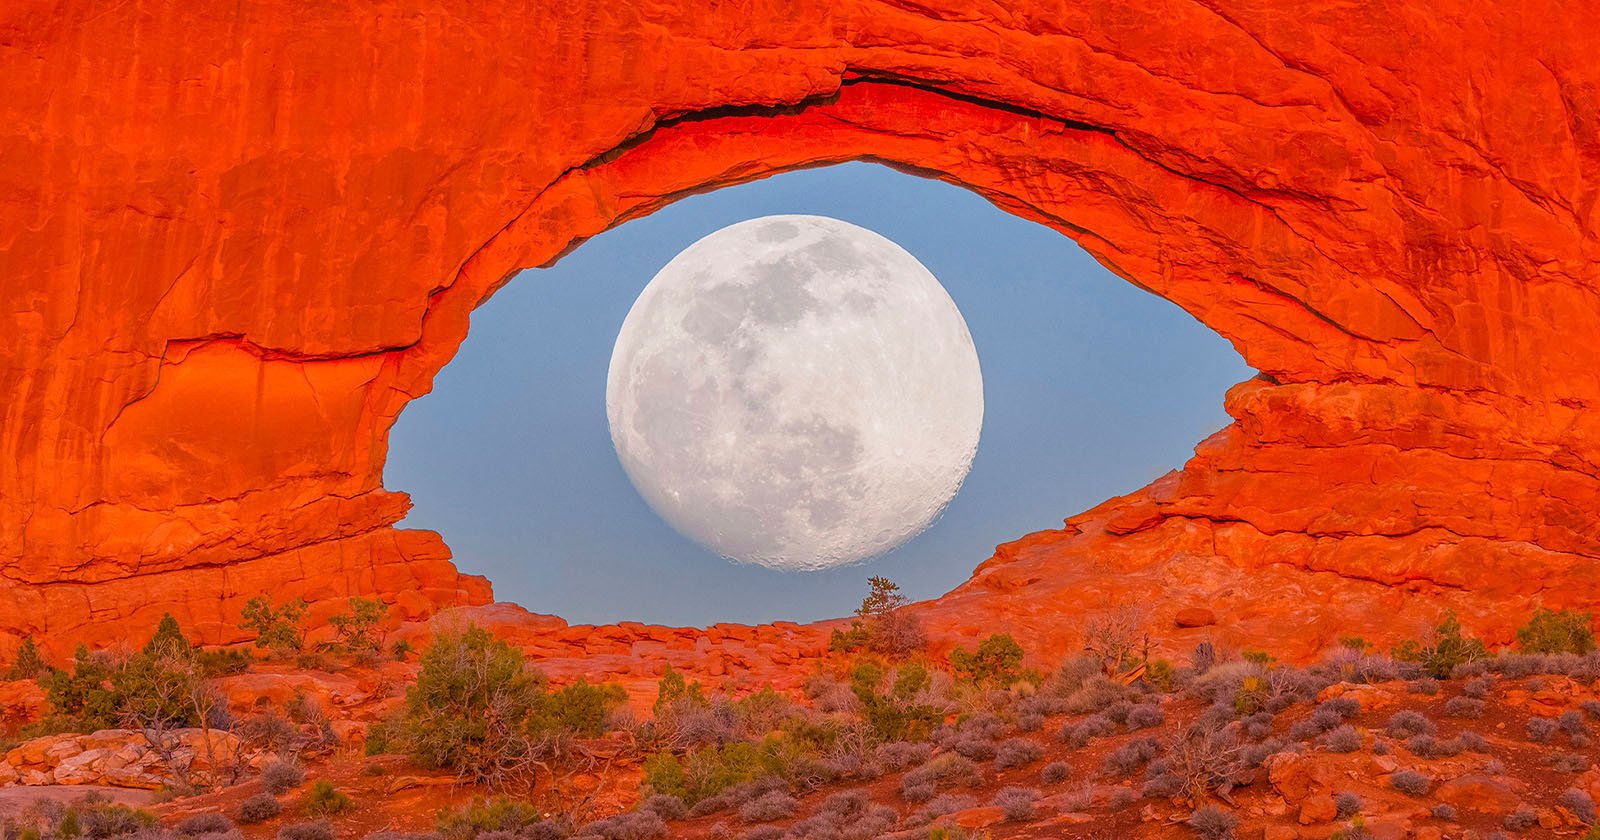  image full moon through rock formation looks like 